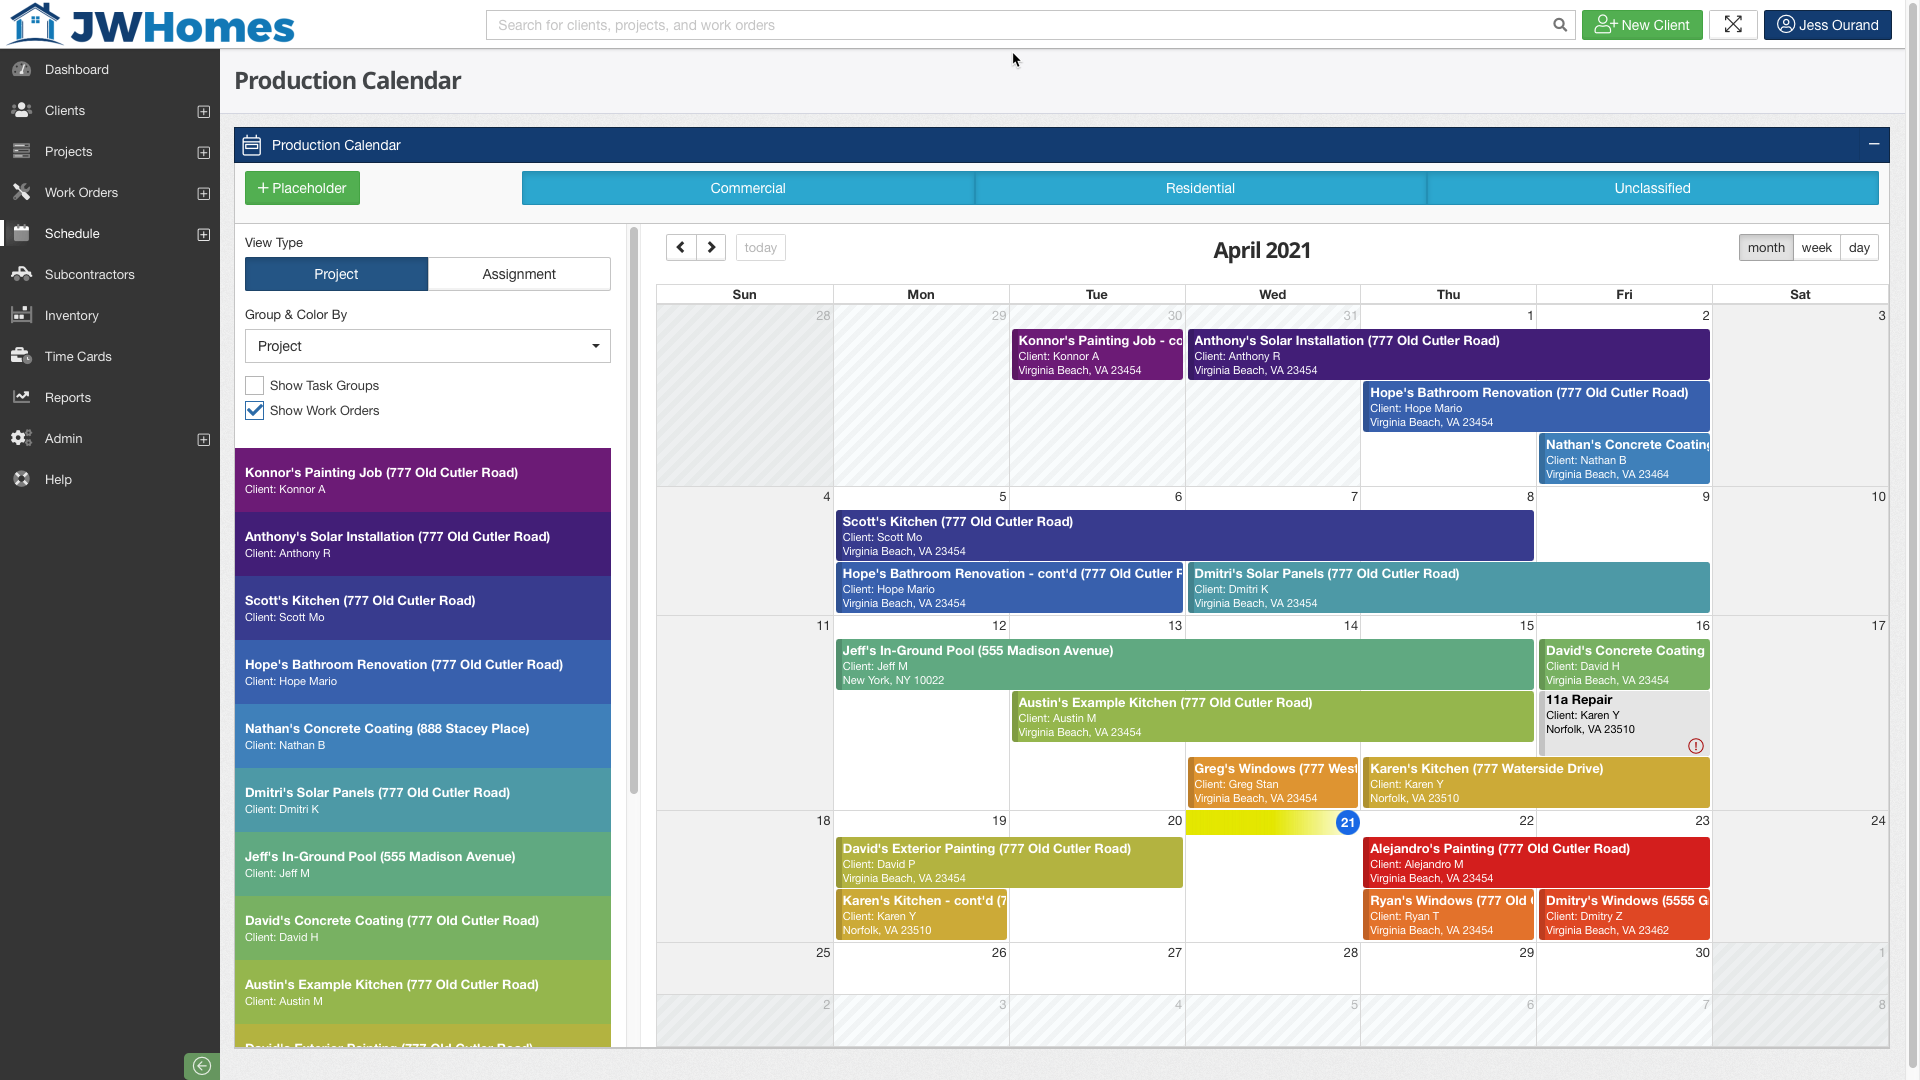 Builder Prime Software - Easily drag-and-drop to schedule projects. The Production Calendar allows you to quickly manage the day, week, or month’s jobs for all employees from one view.